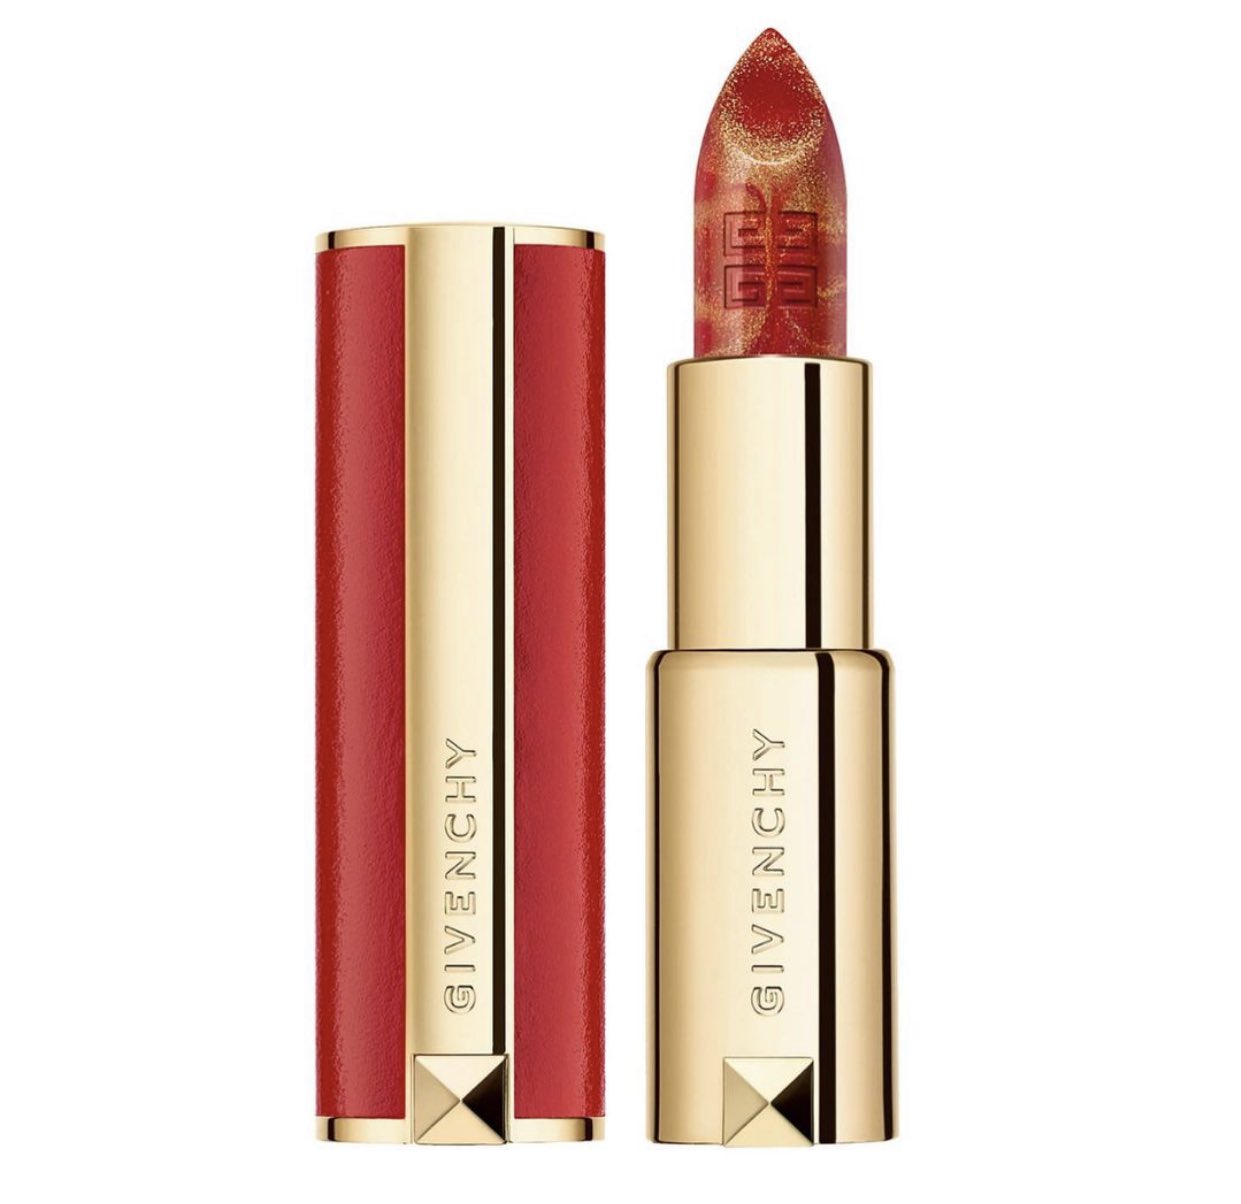 2 12 - Givenchy Le Rouge Lunar New Year Marble Lipstick